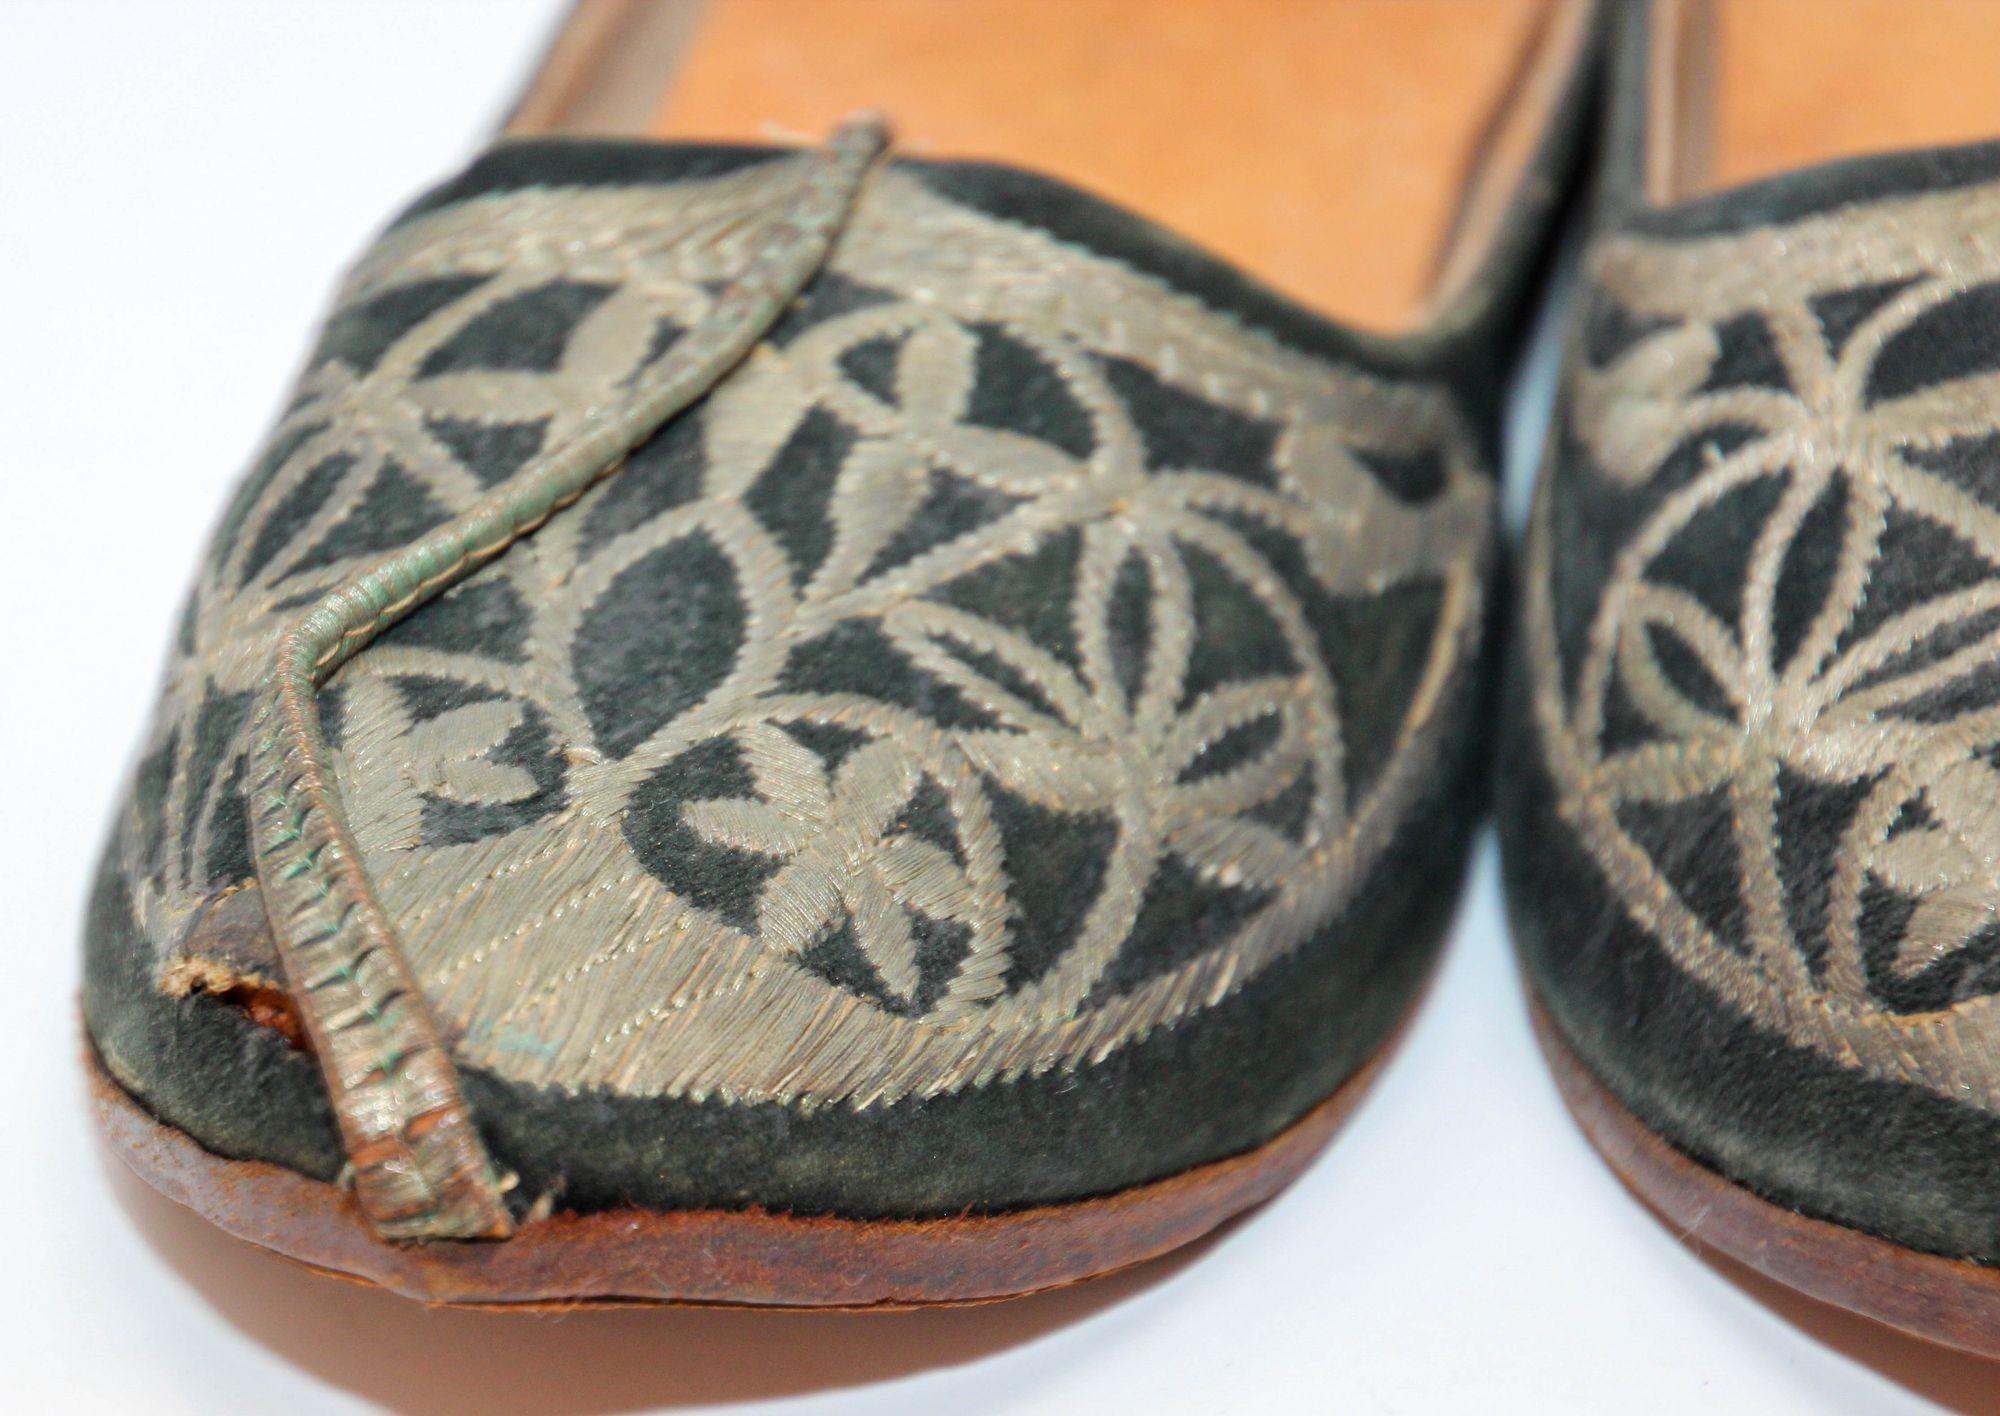 Moorish Mughal Style Curled Toe Black Leather Shoes from Tony Duquette Estate In Fair Condition For Sale In North Hollywood, CA